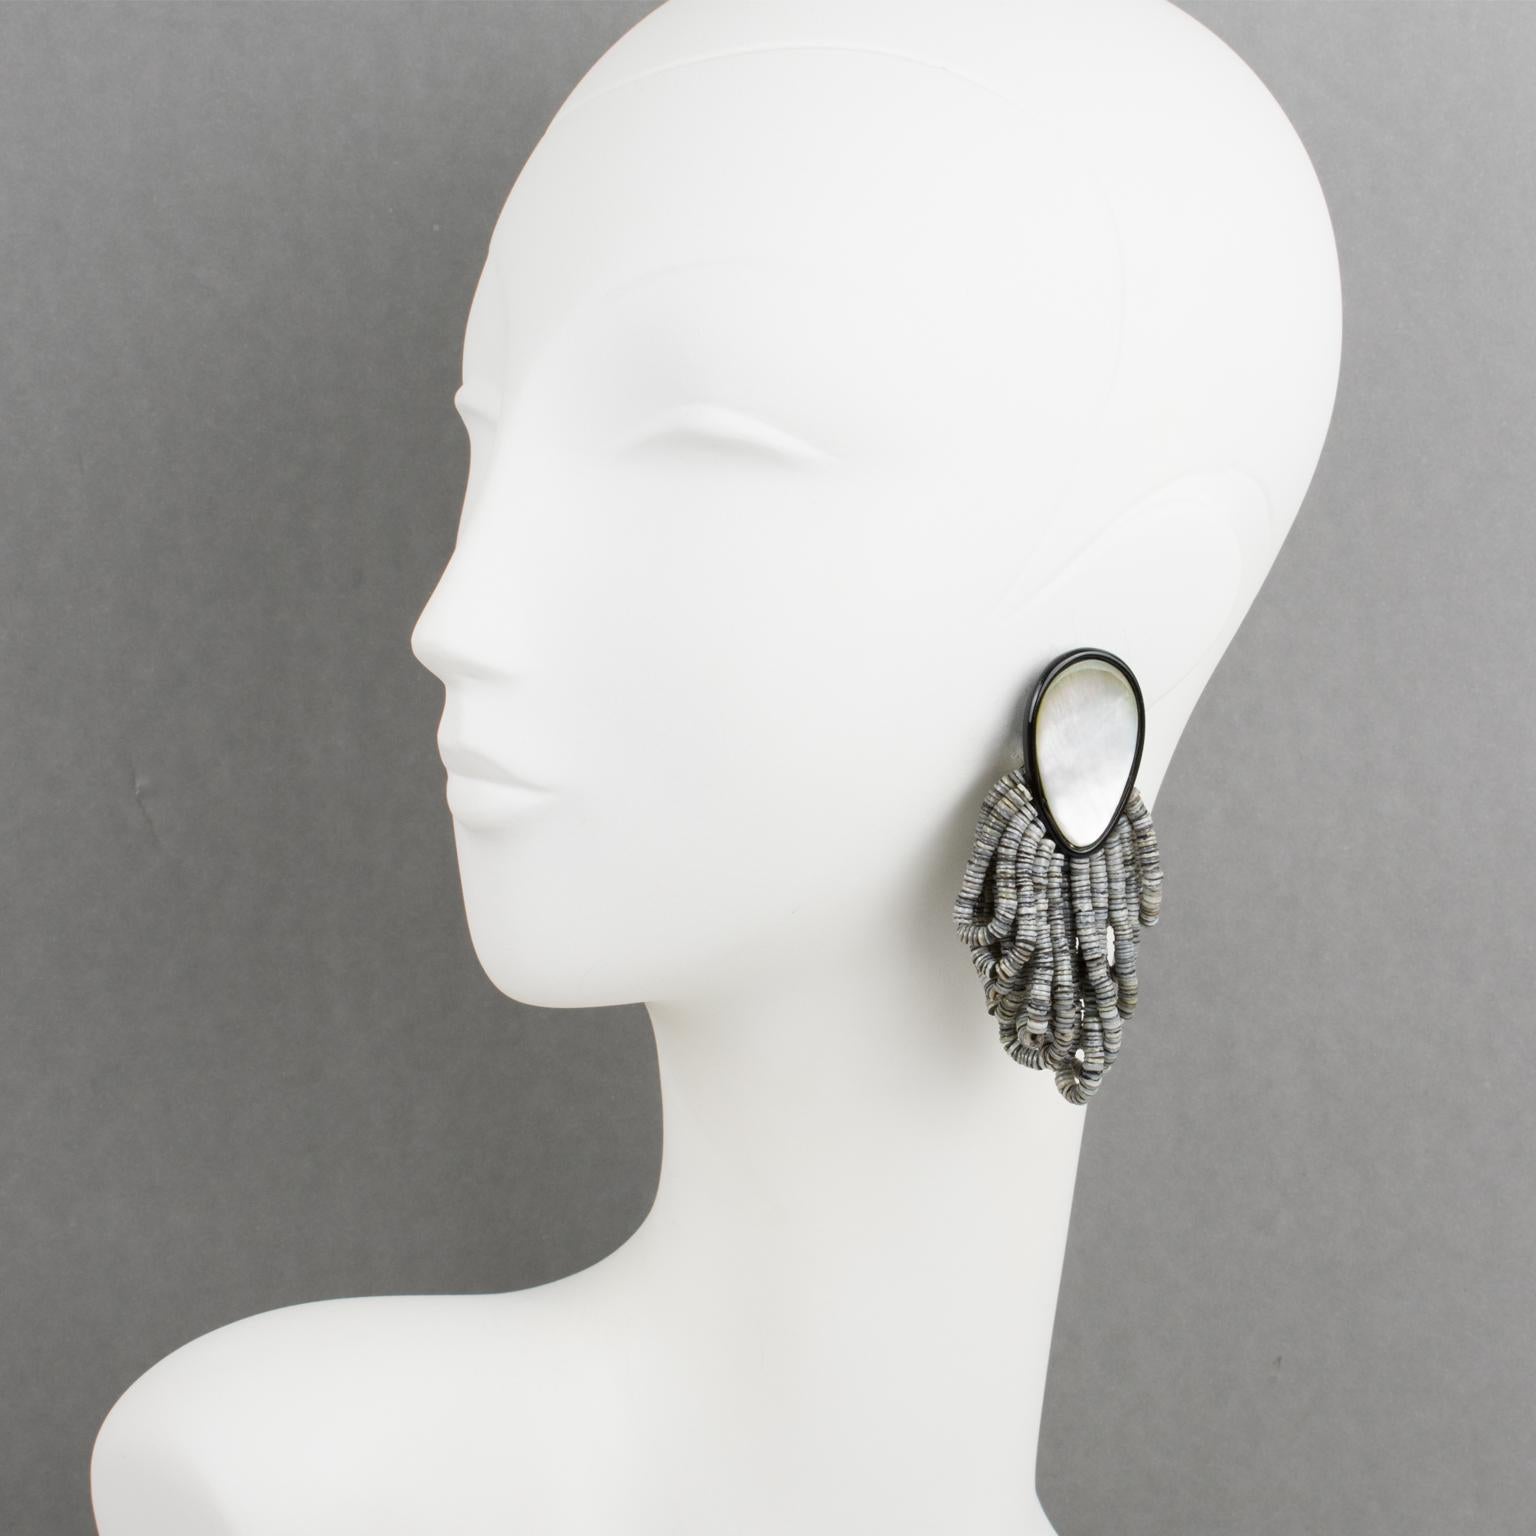 Elegant oversized dangling clip-on earrings designed by Gerda Lyngaard for Monies. These earrings feature smooth hand-carved teardrop black resin shapes ornate with seashell elements. They are ornate with tiny gray and white seashell seed beads in a